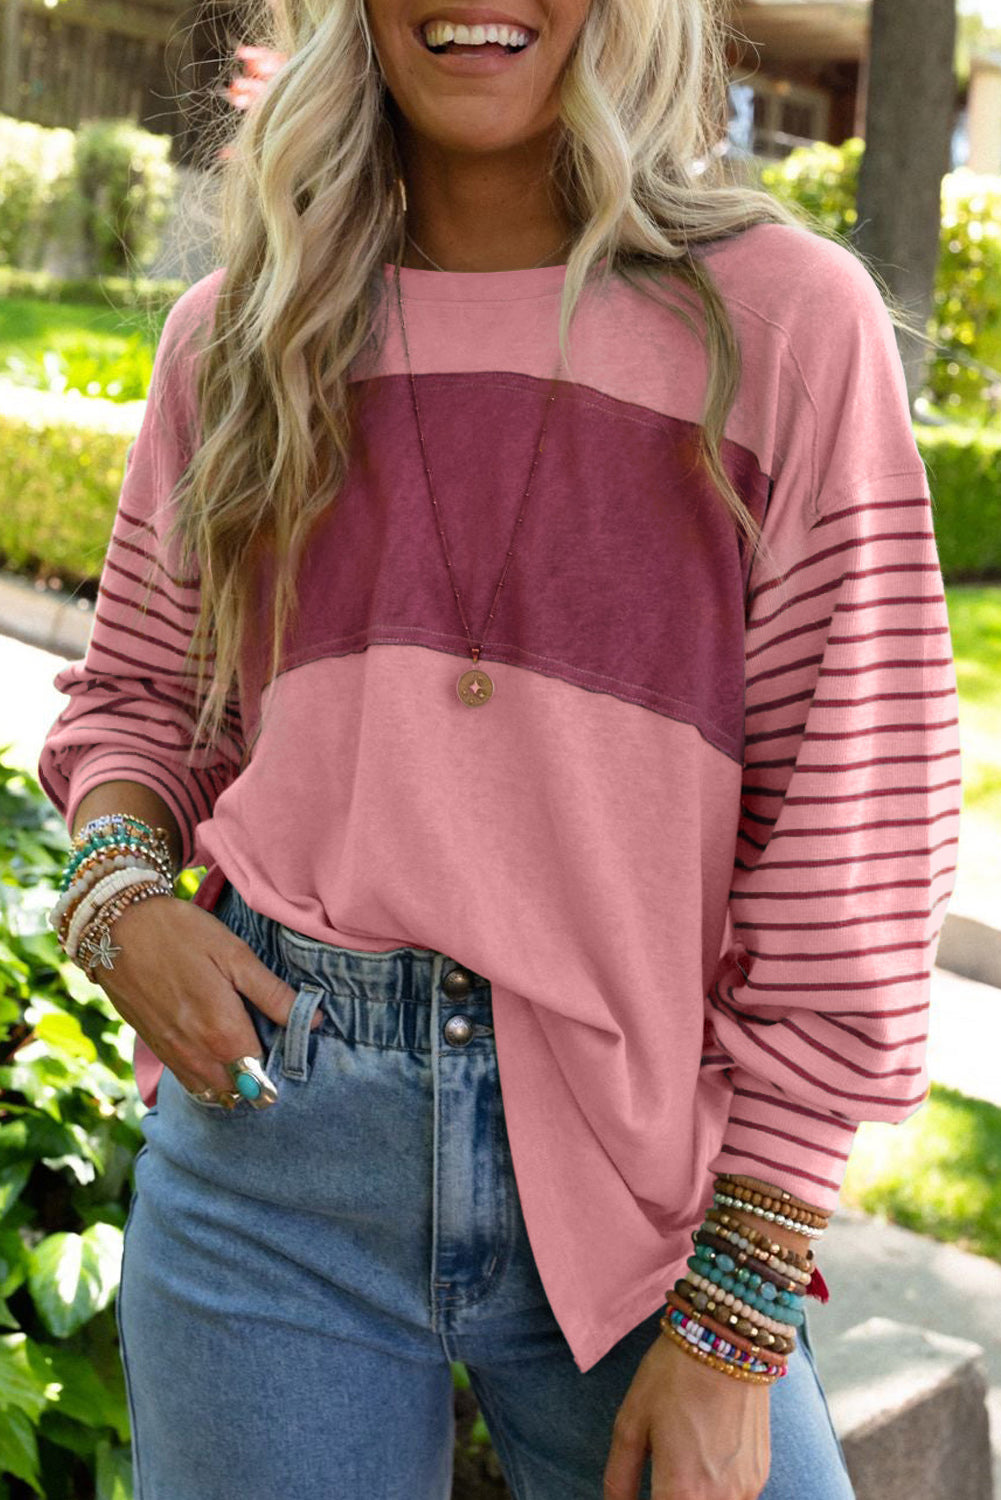 Peach Blossom Colorblock Striped Bishop Sleeve Top